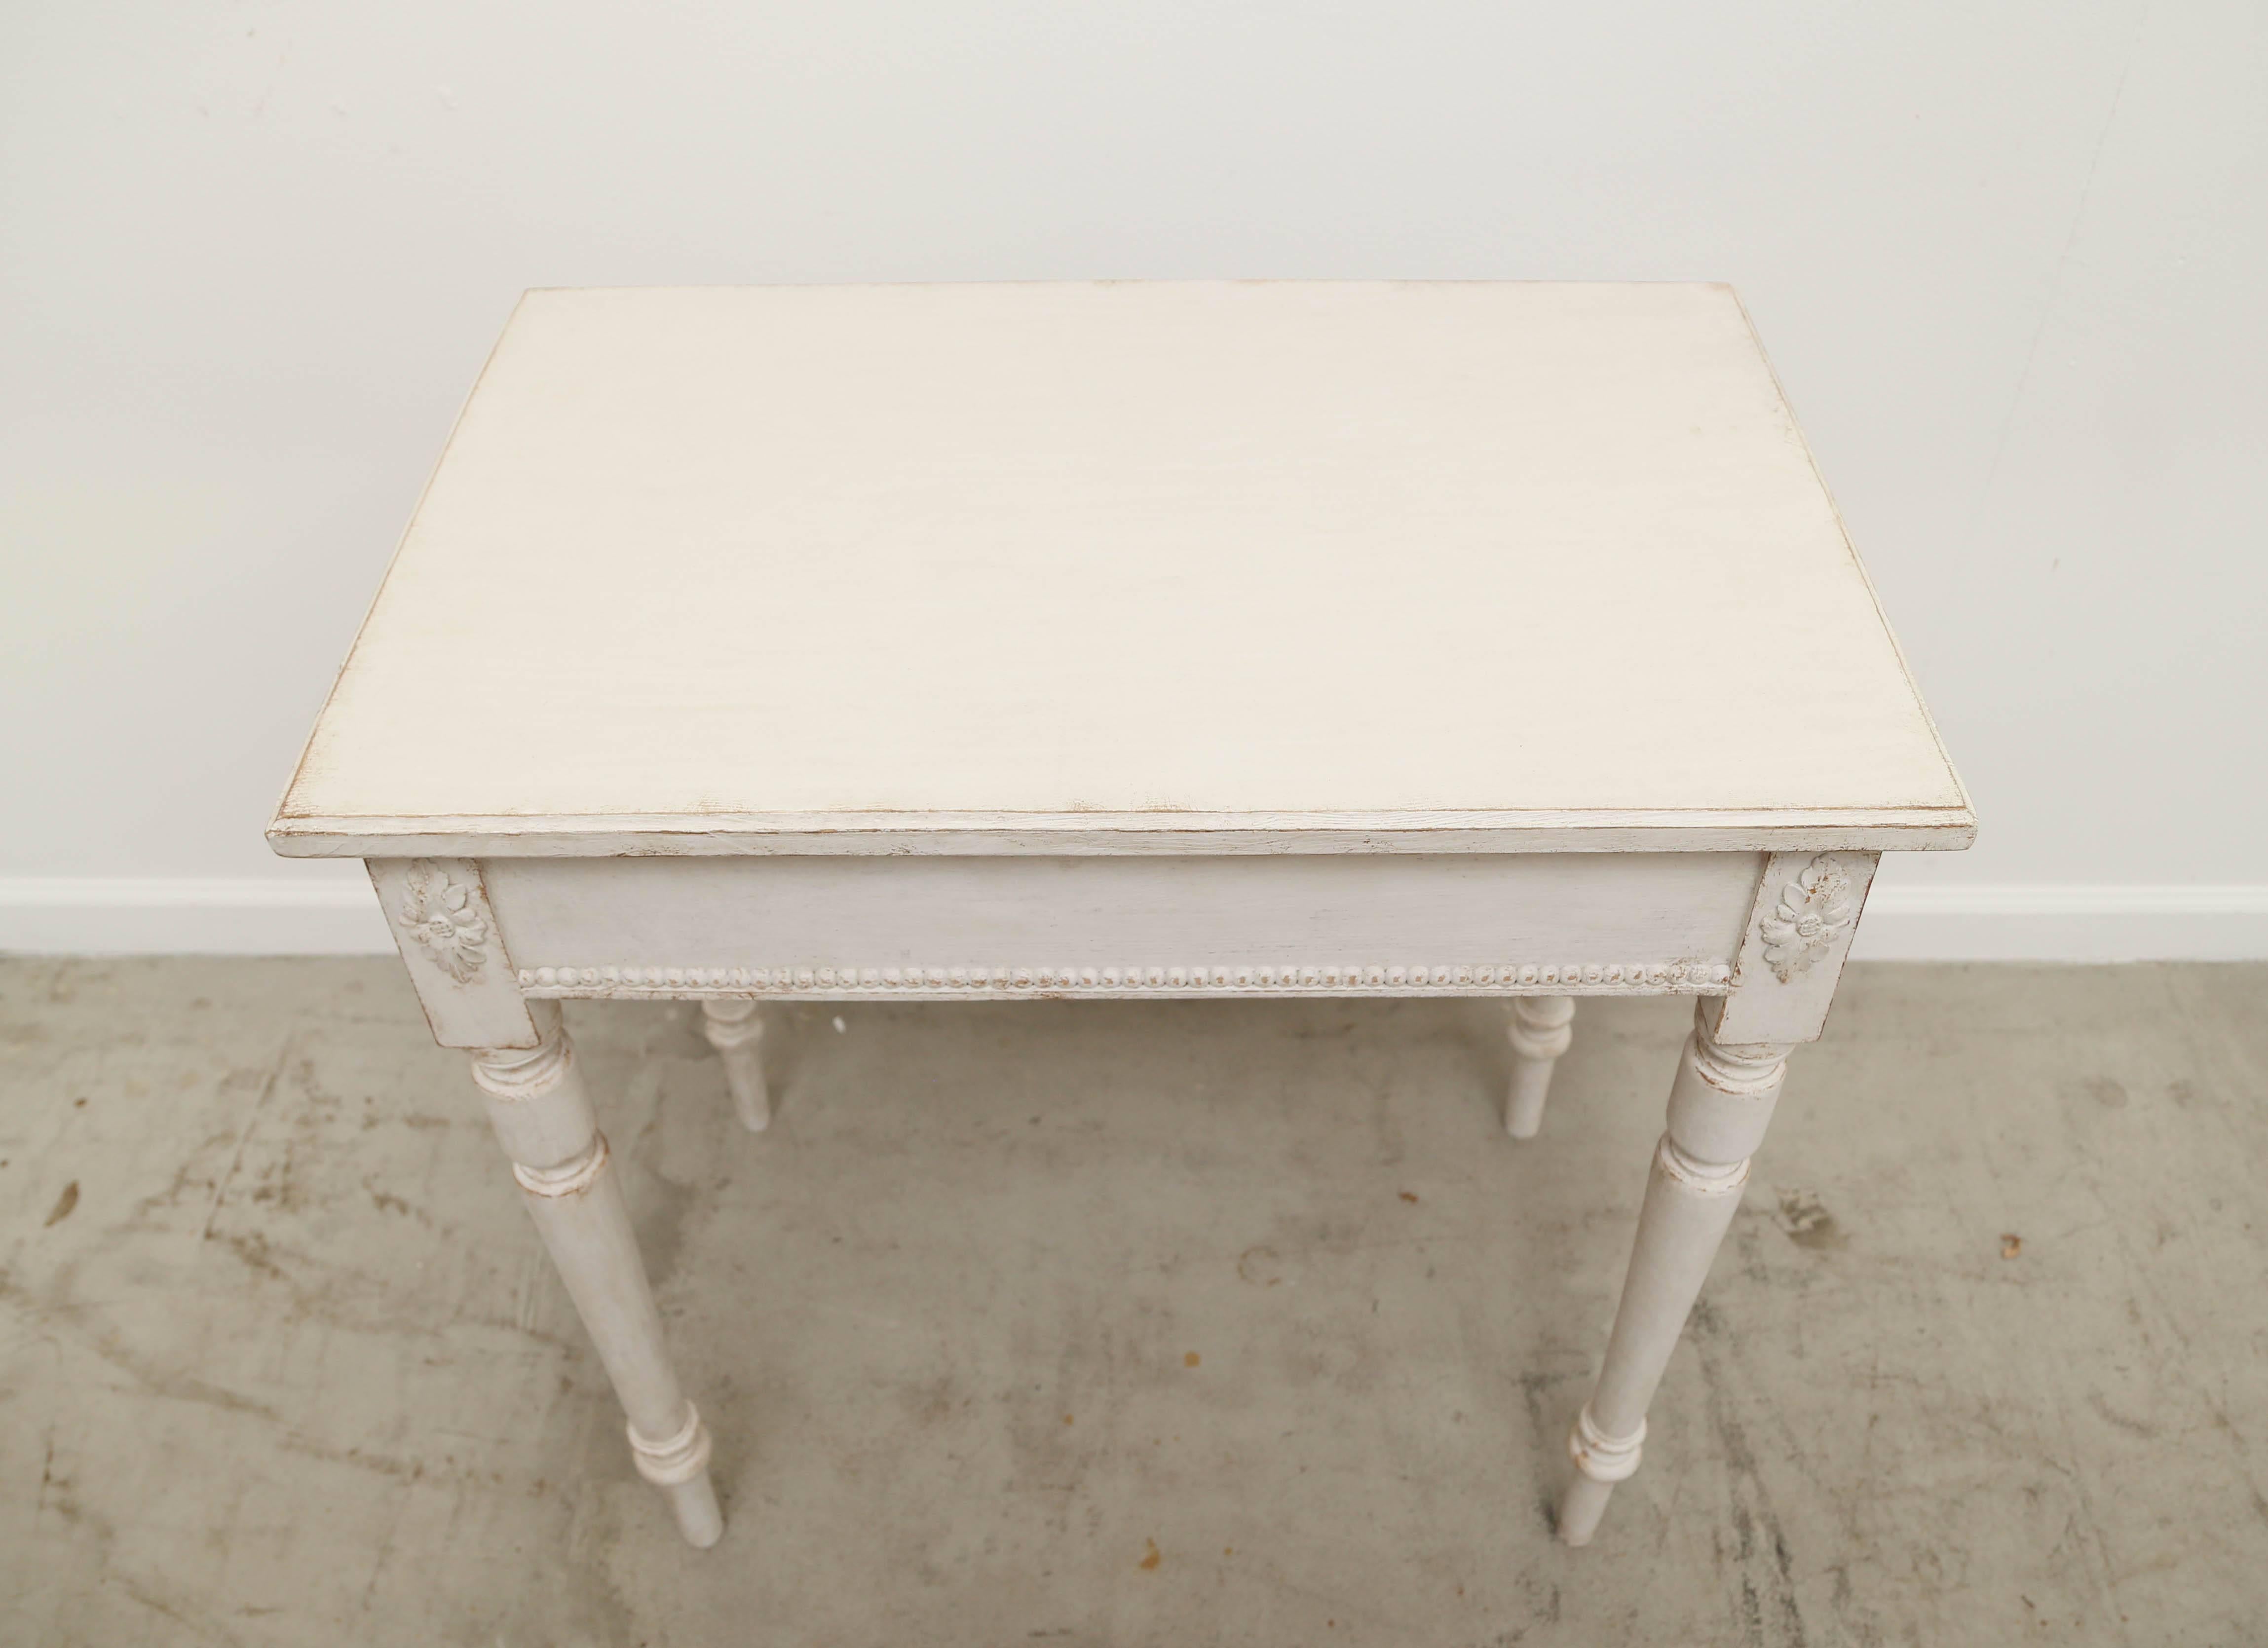 Pair of Swedish antique painted side tables 19th century with pearl beaded apron and rounded fluted legs with a flower rosette. Refreshed paint in Gustavian ivory/ white finish.

Measures: H 30.5'', W 29.75'', D: 19''.
 